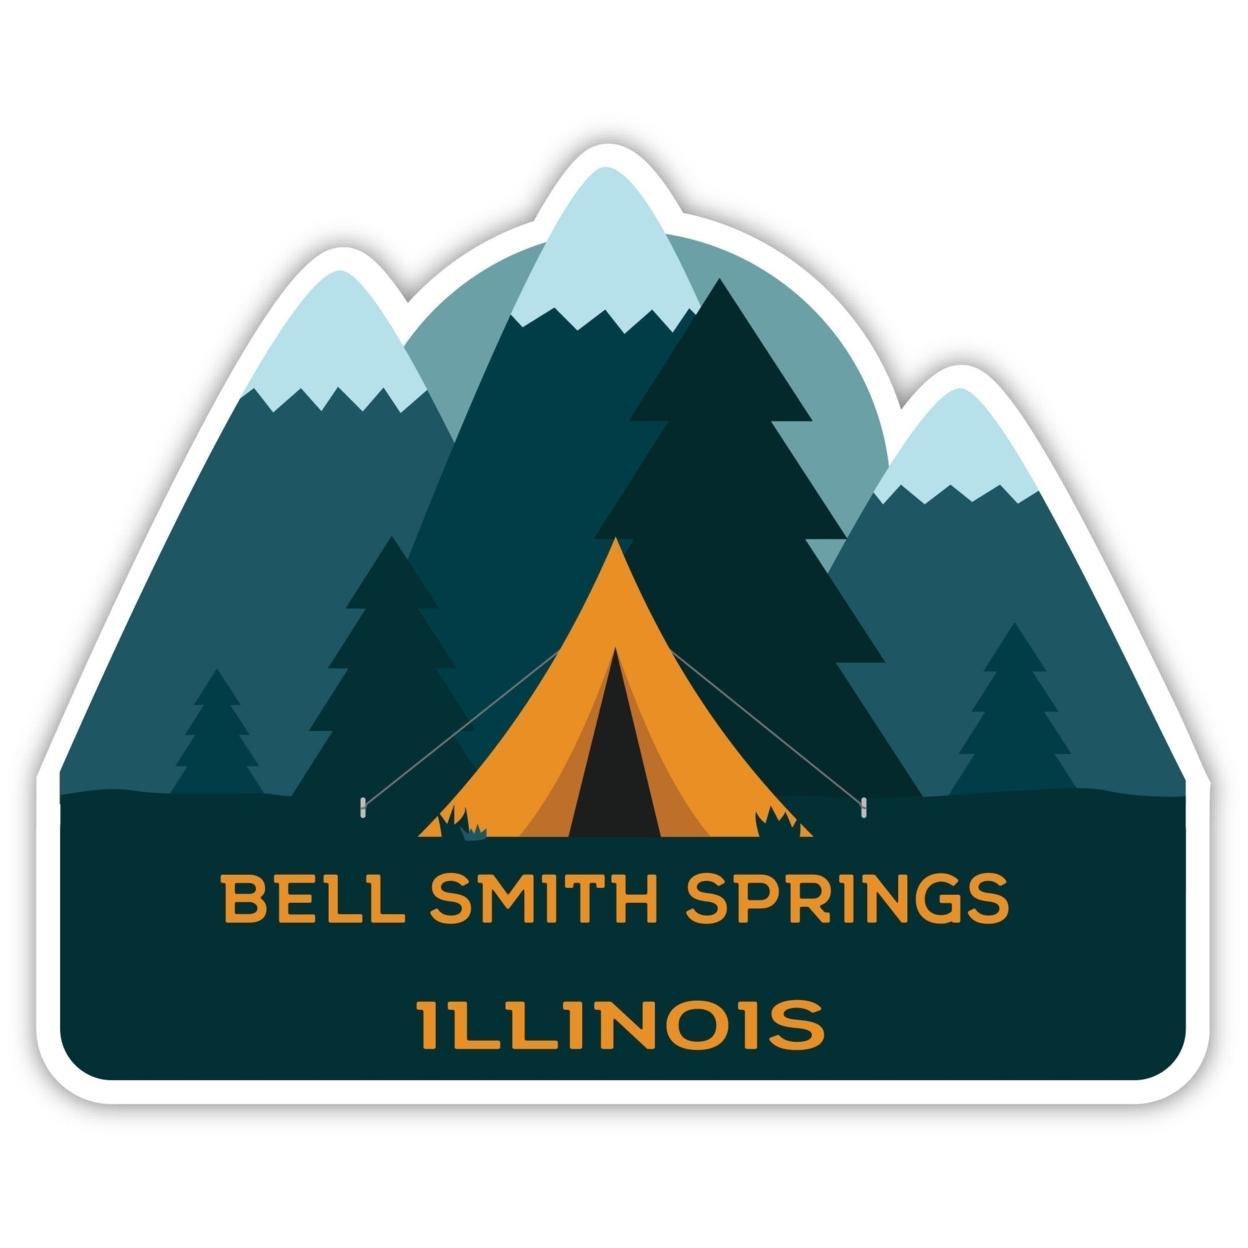 Bell Smith Springs Illinois Souvenir Decorative Stickers (Choose Theme And Size) - 4-Pack, 8-Inch, Tent